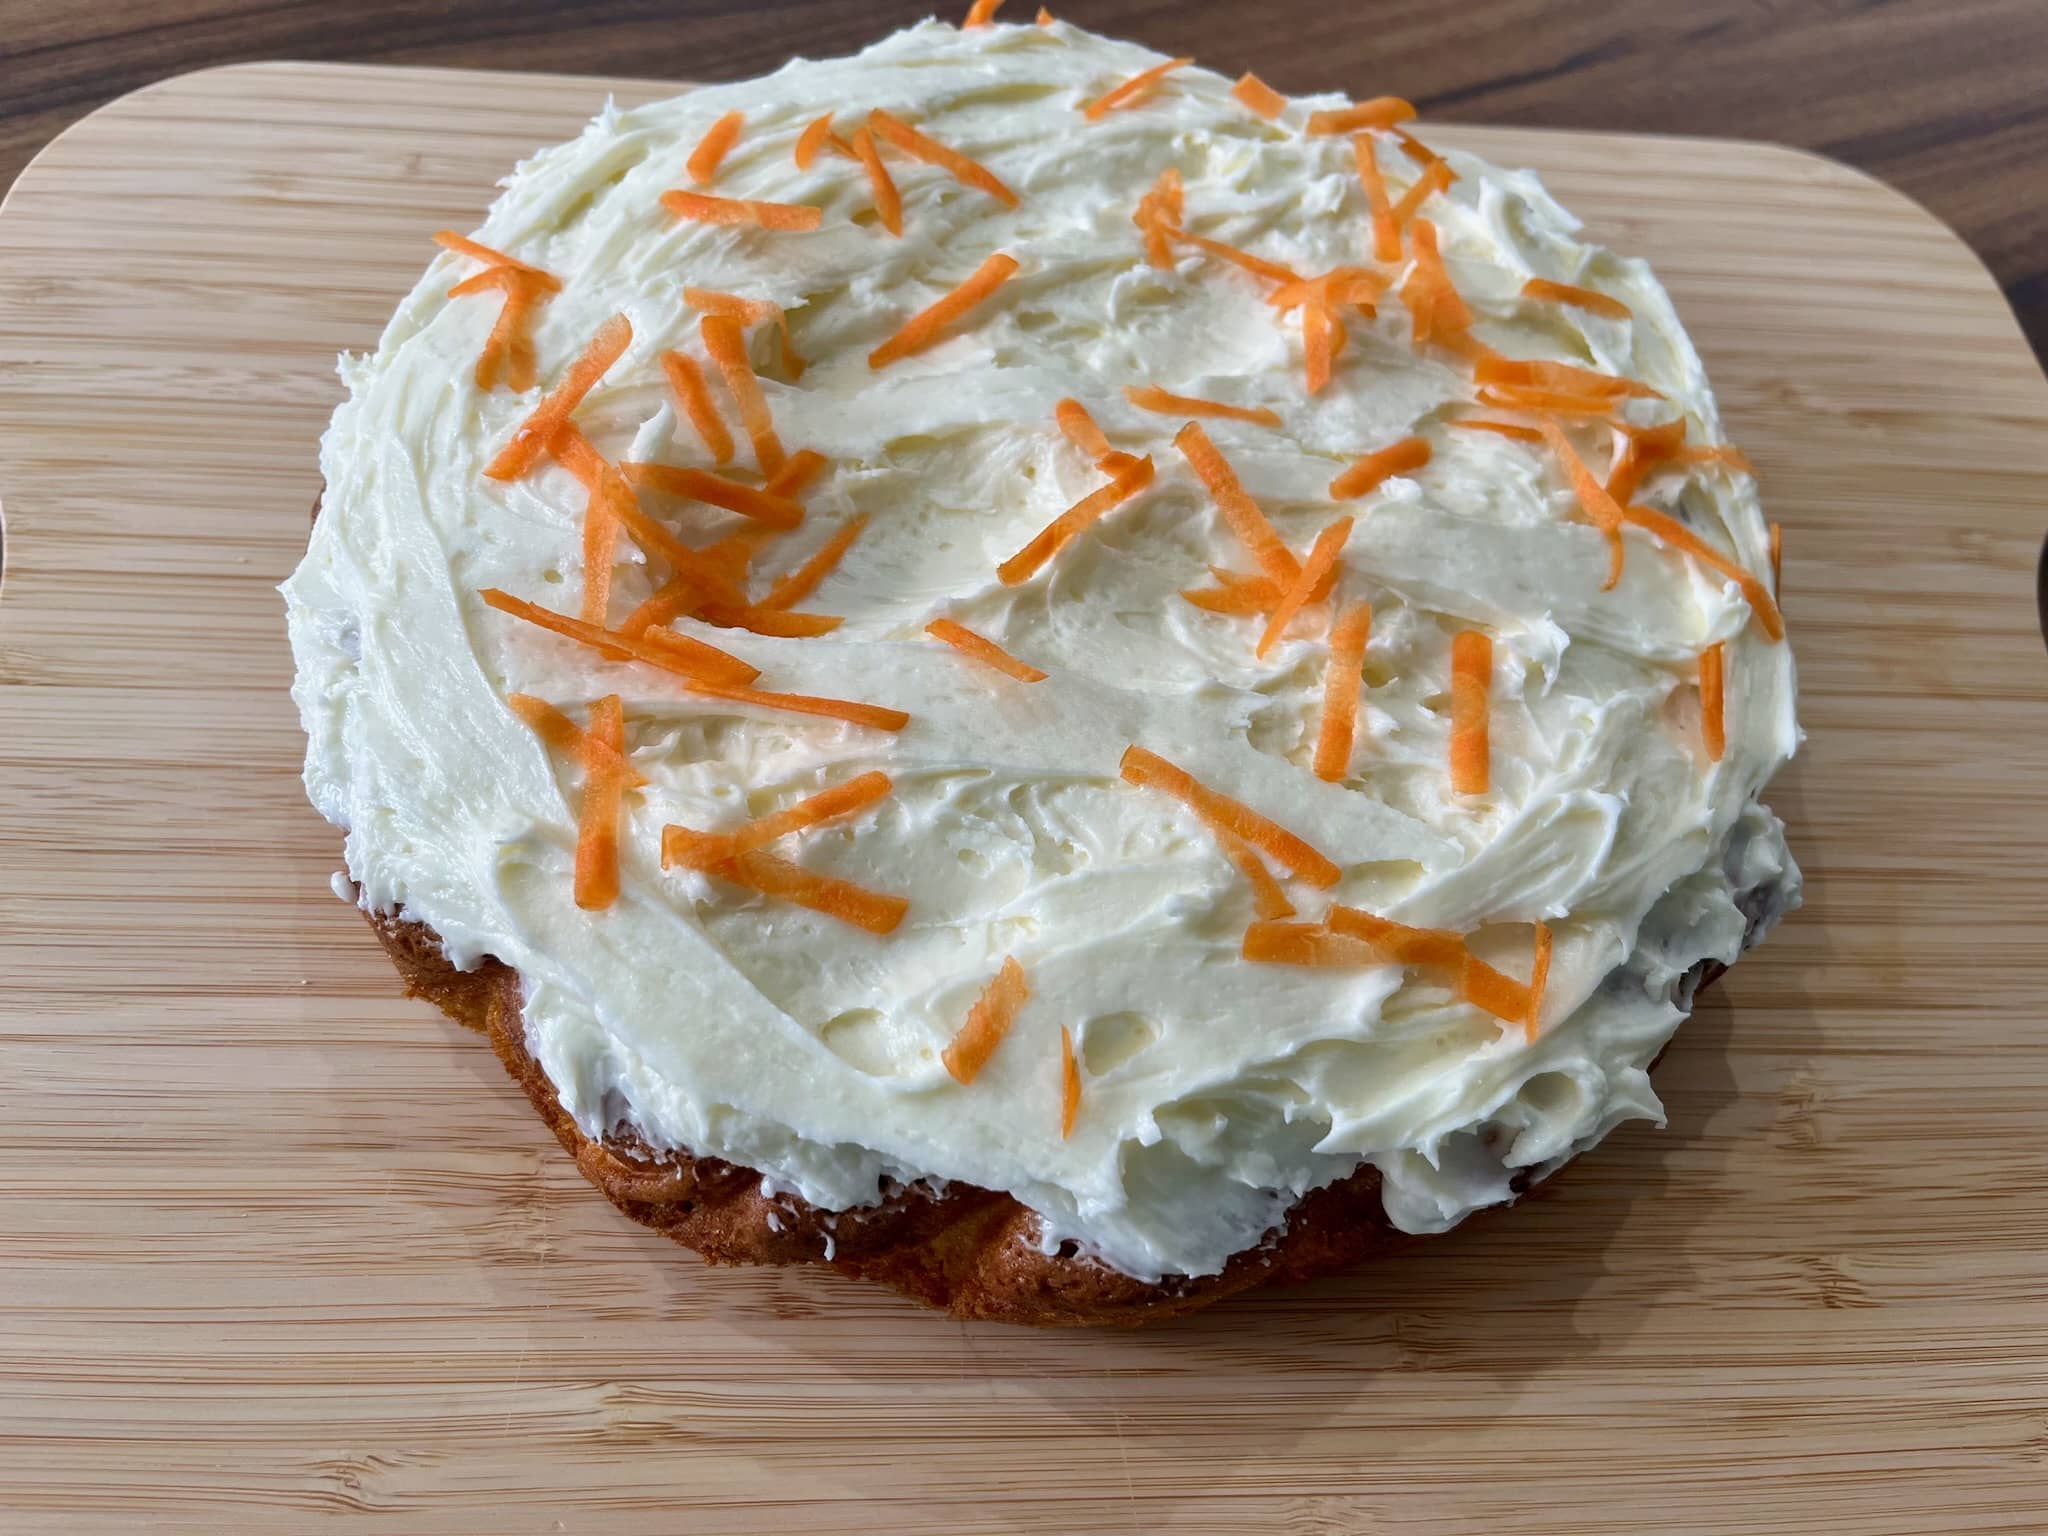 The baked carrot cake is decorated with icing and carrot shavings